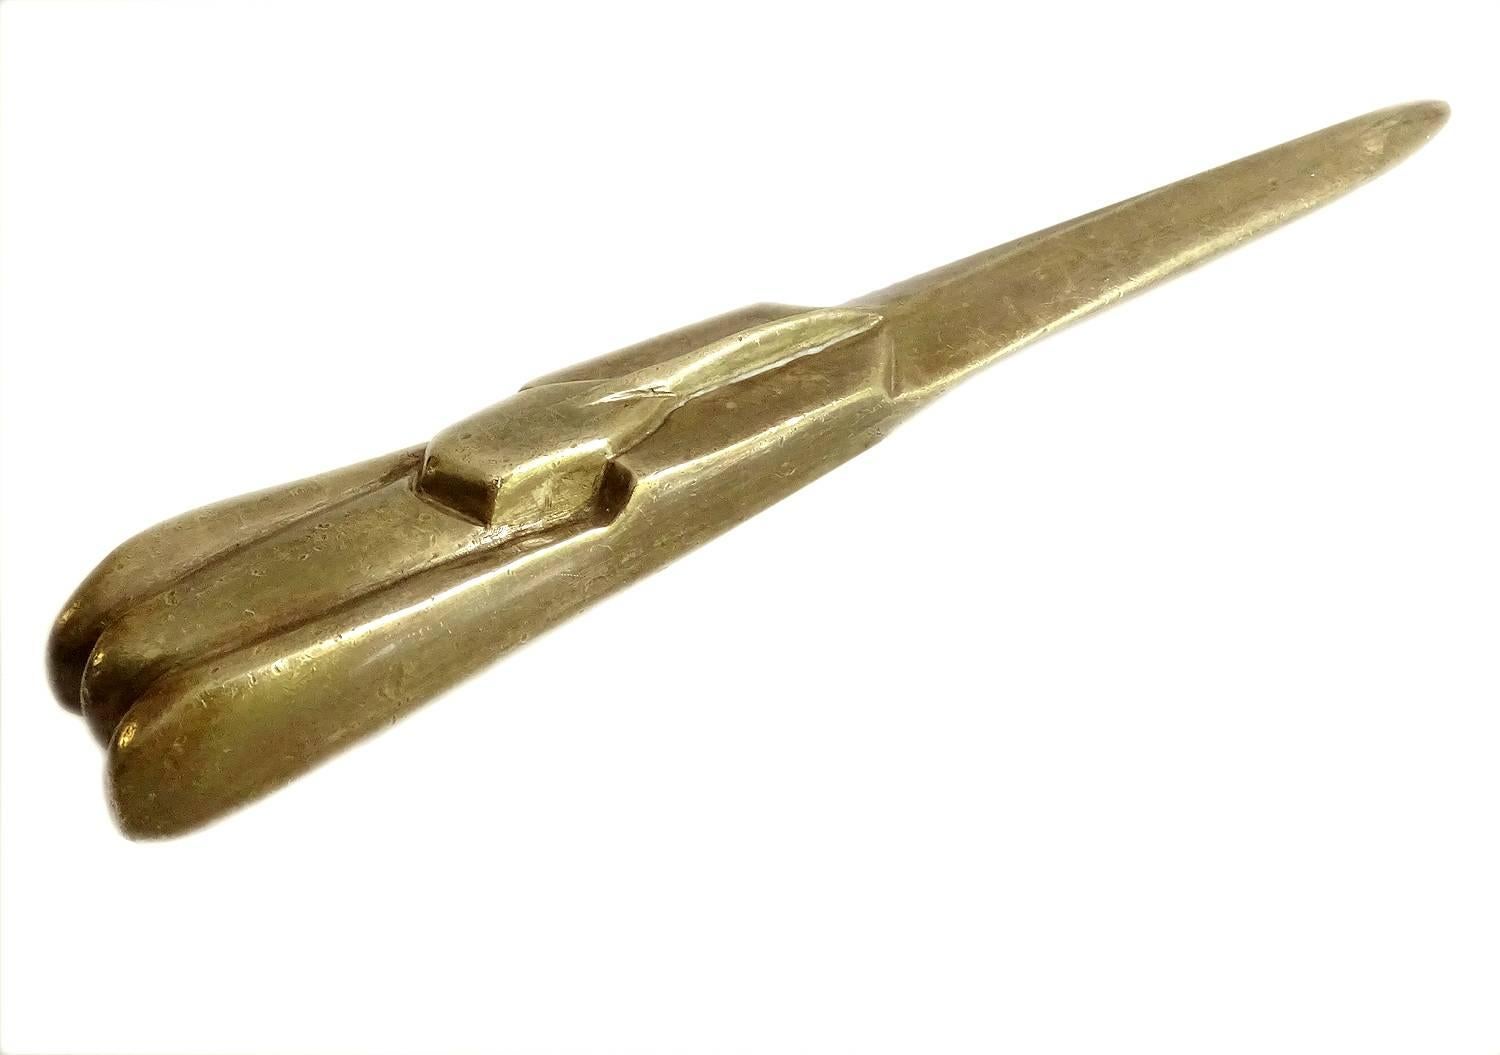 This amazing sensual and sculptural heavy polished bronze letter opener, desk accessory or object features a swooshing car in the style of the streamlined automobiles of the 1930s, think of Bugatti or Delahaye, manufactured, circa 1935 in France,